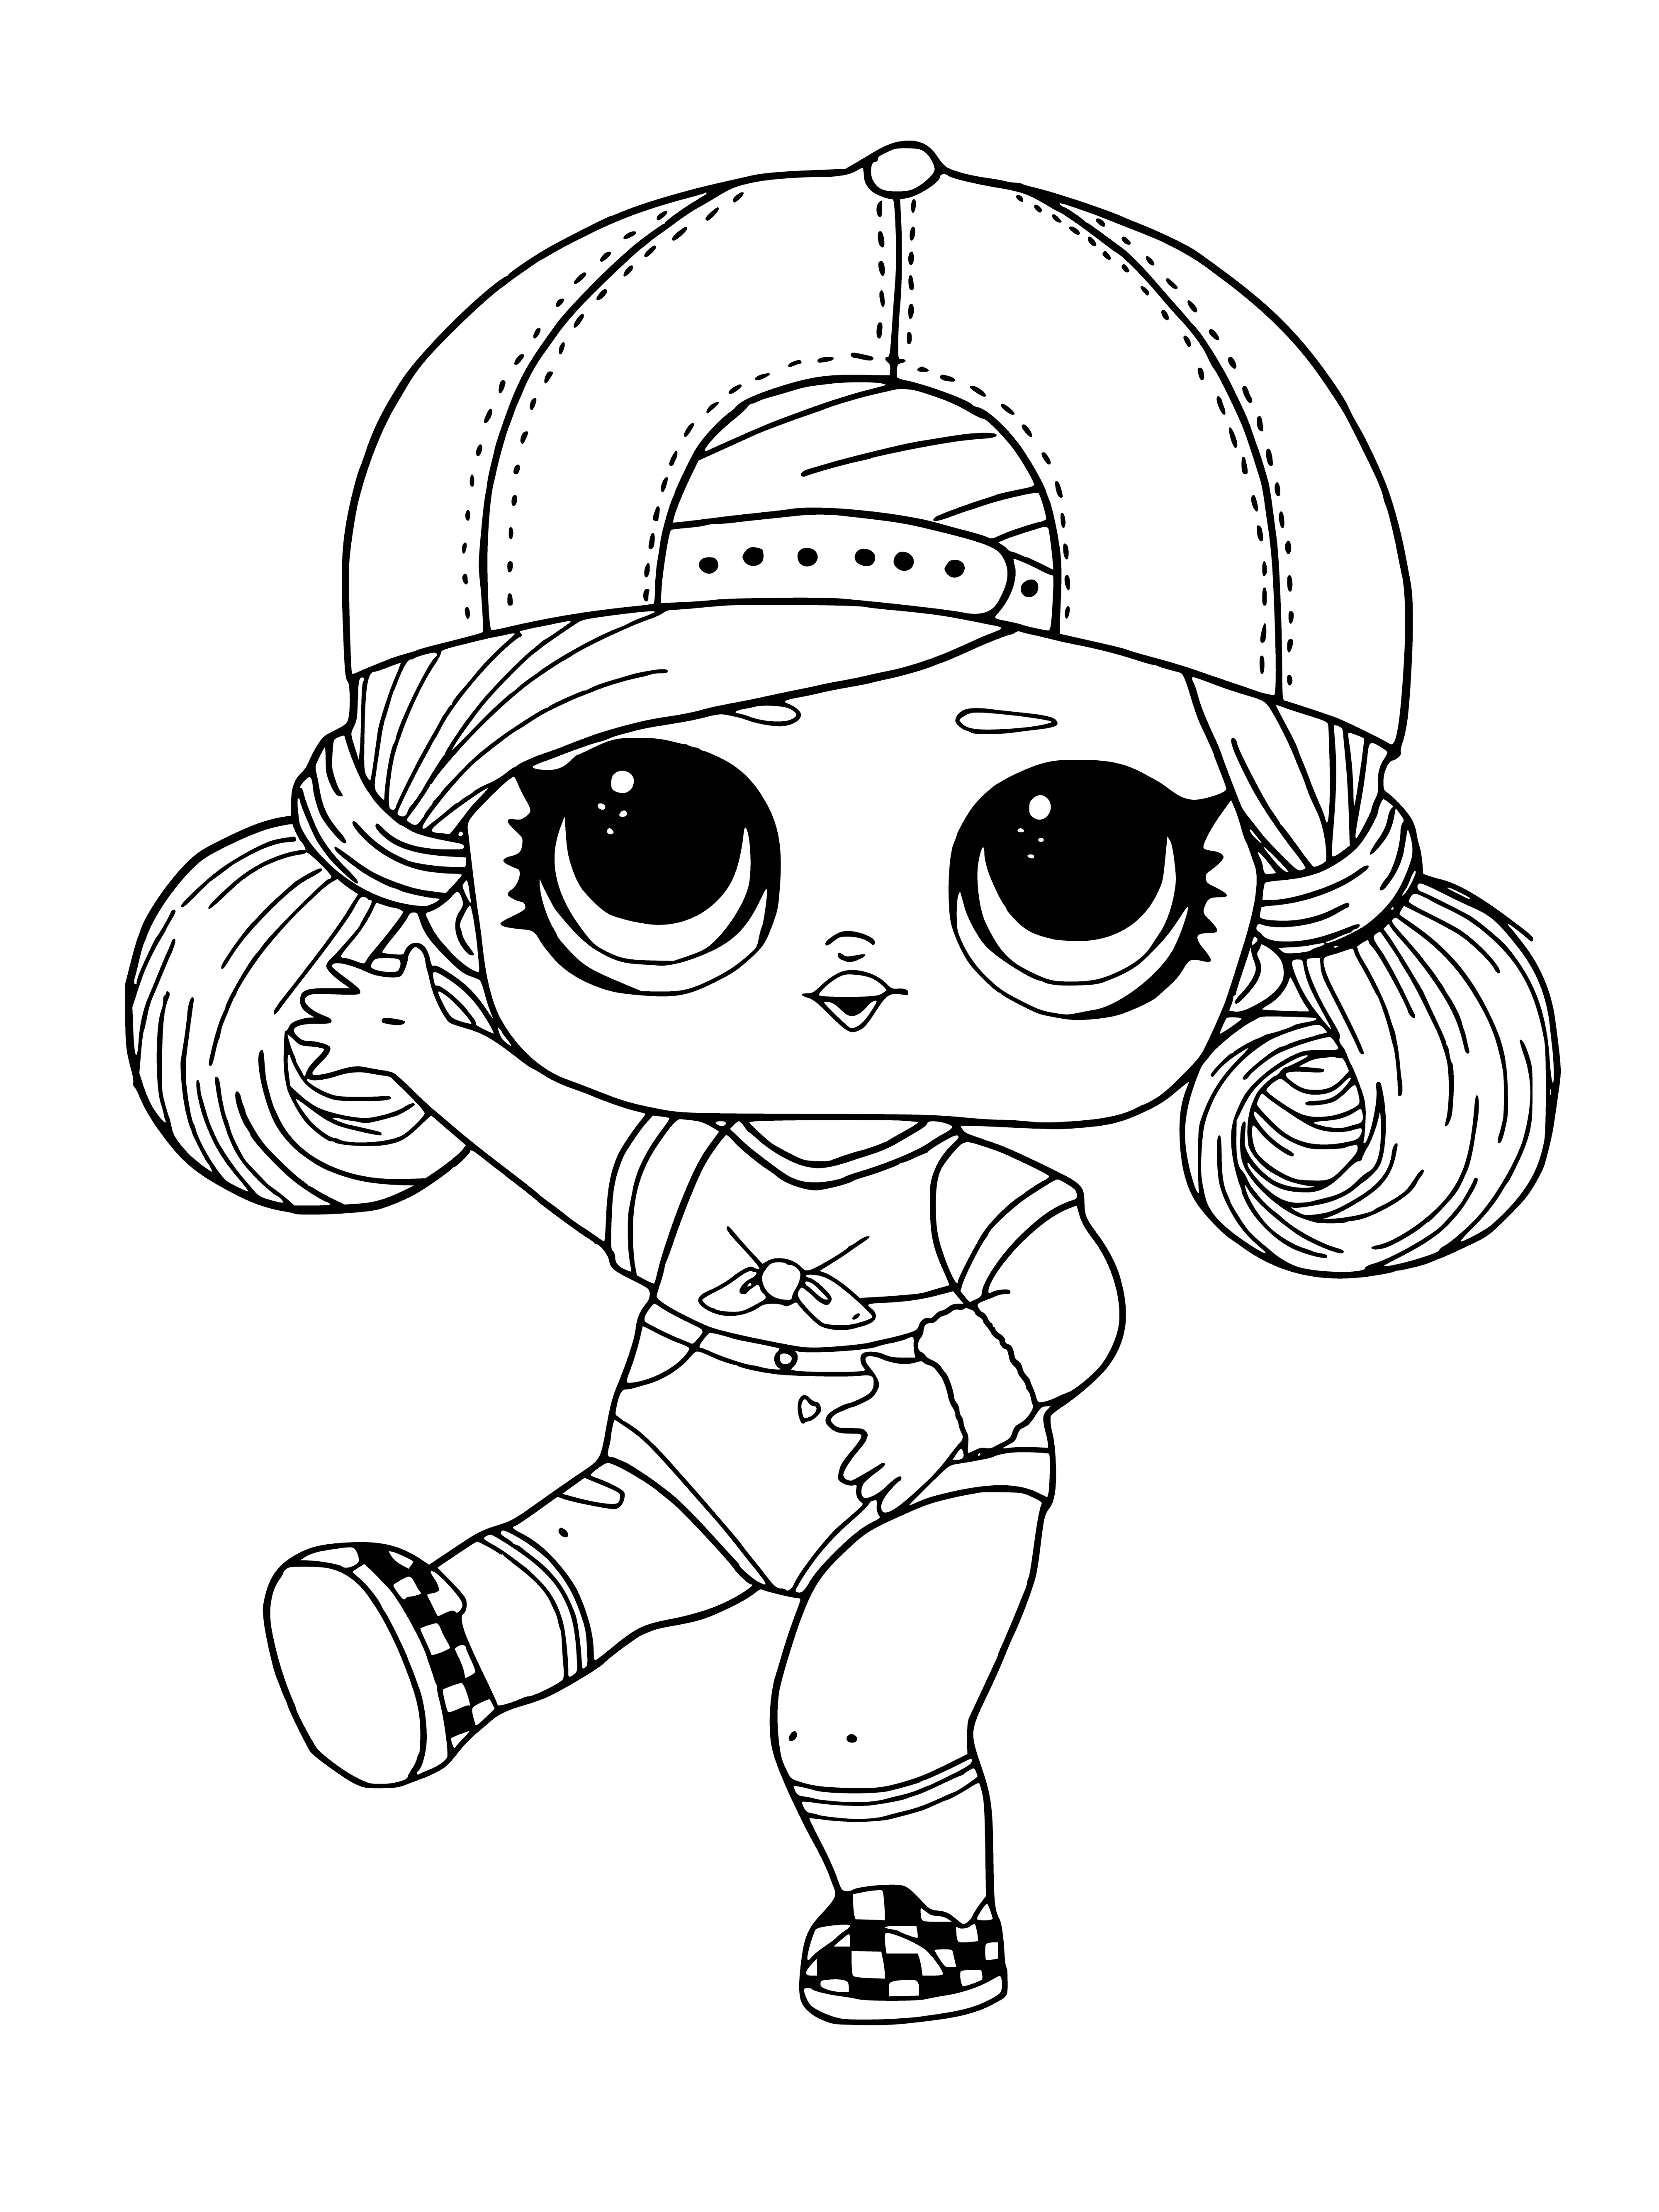 coloring page: Girl skate-ready w/pads, skater dress, bright pink hair, skateboard under her arm: Let's go! #skatelife